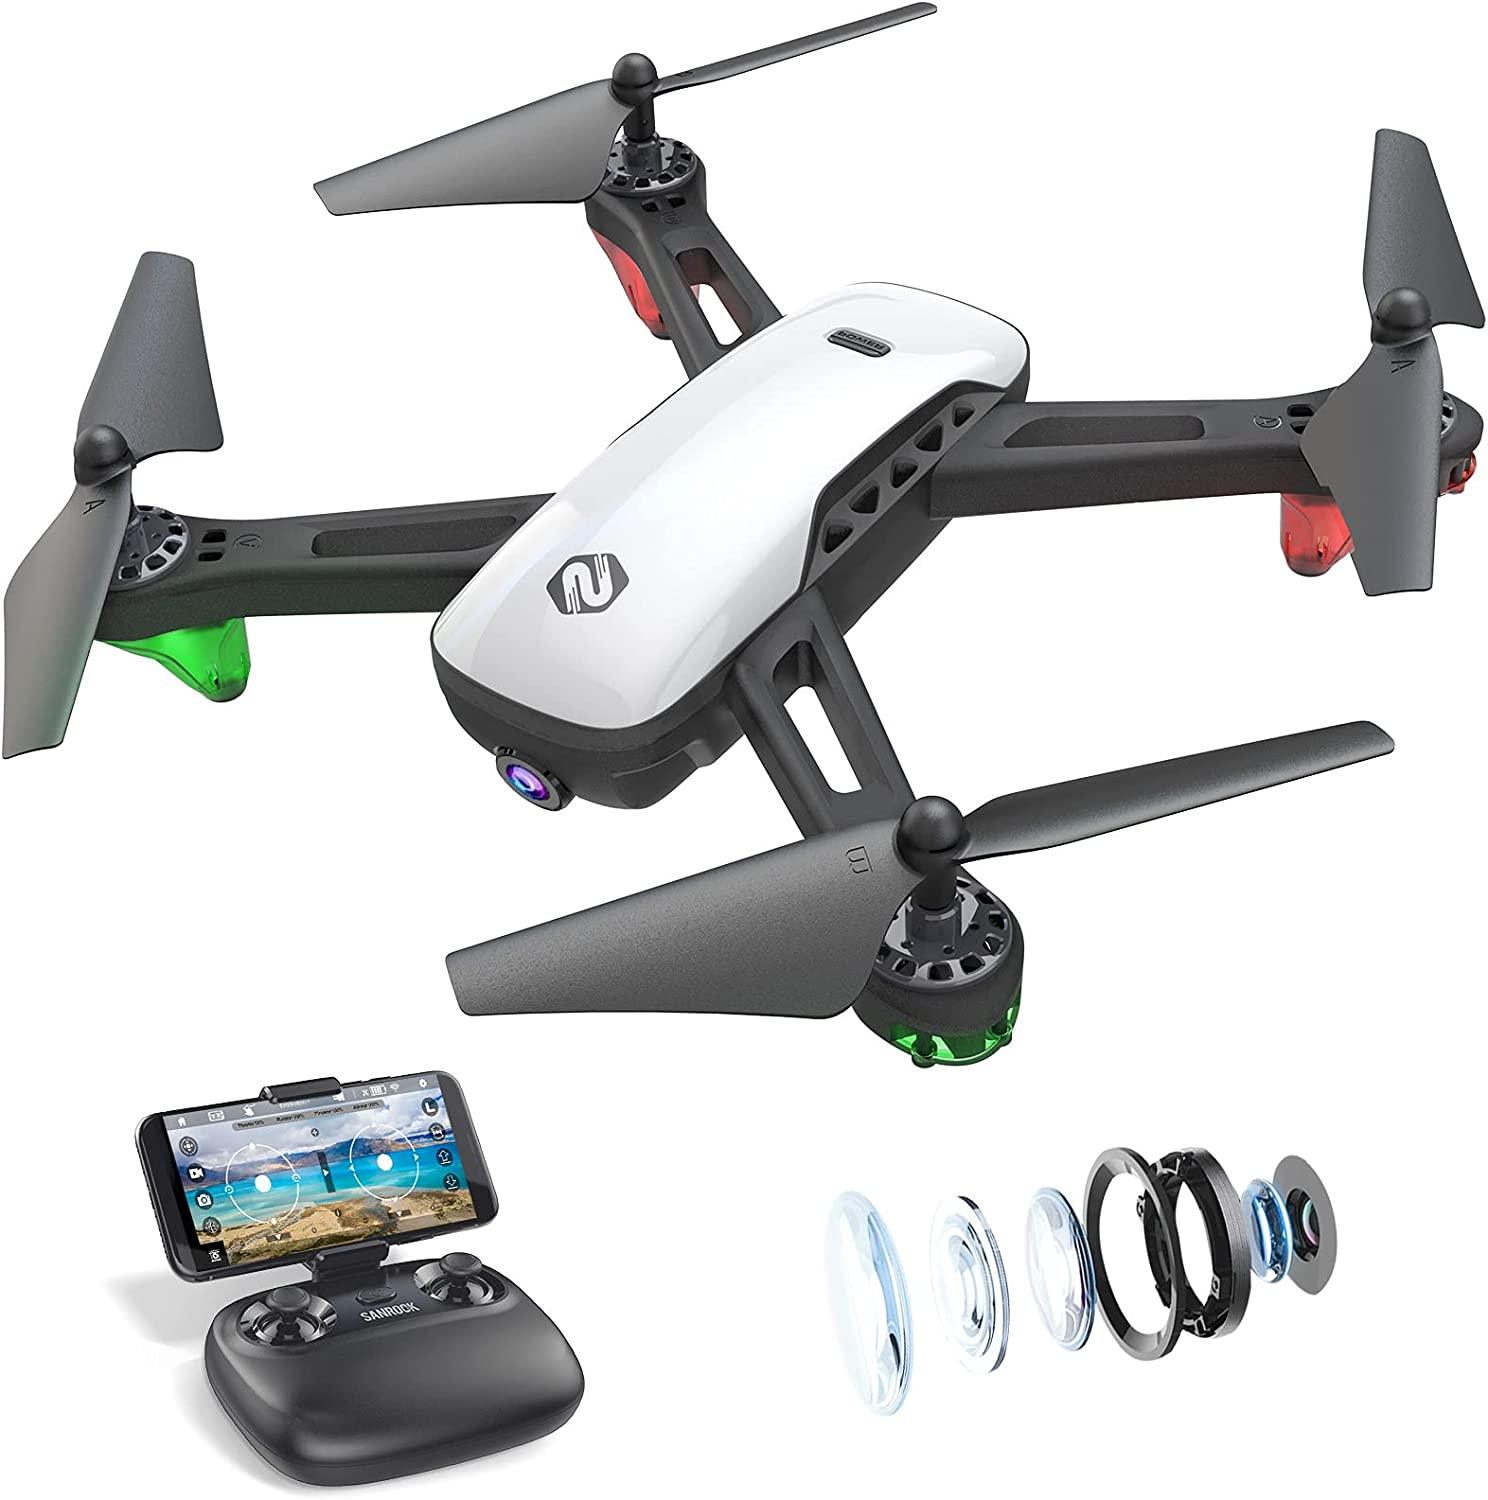  Drone with 1080P Camera for Beginners and Kids